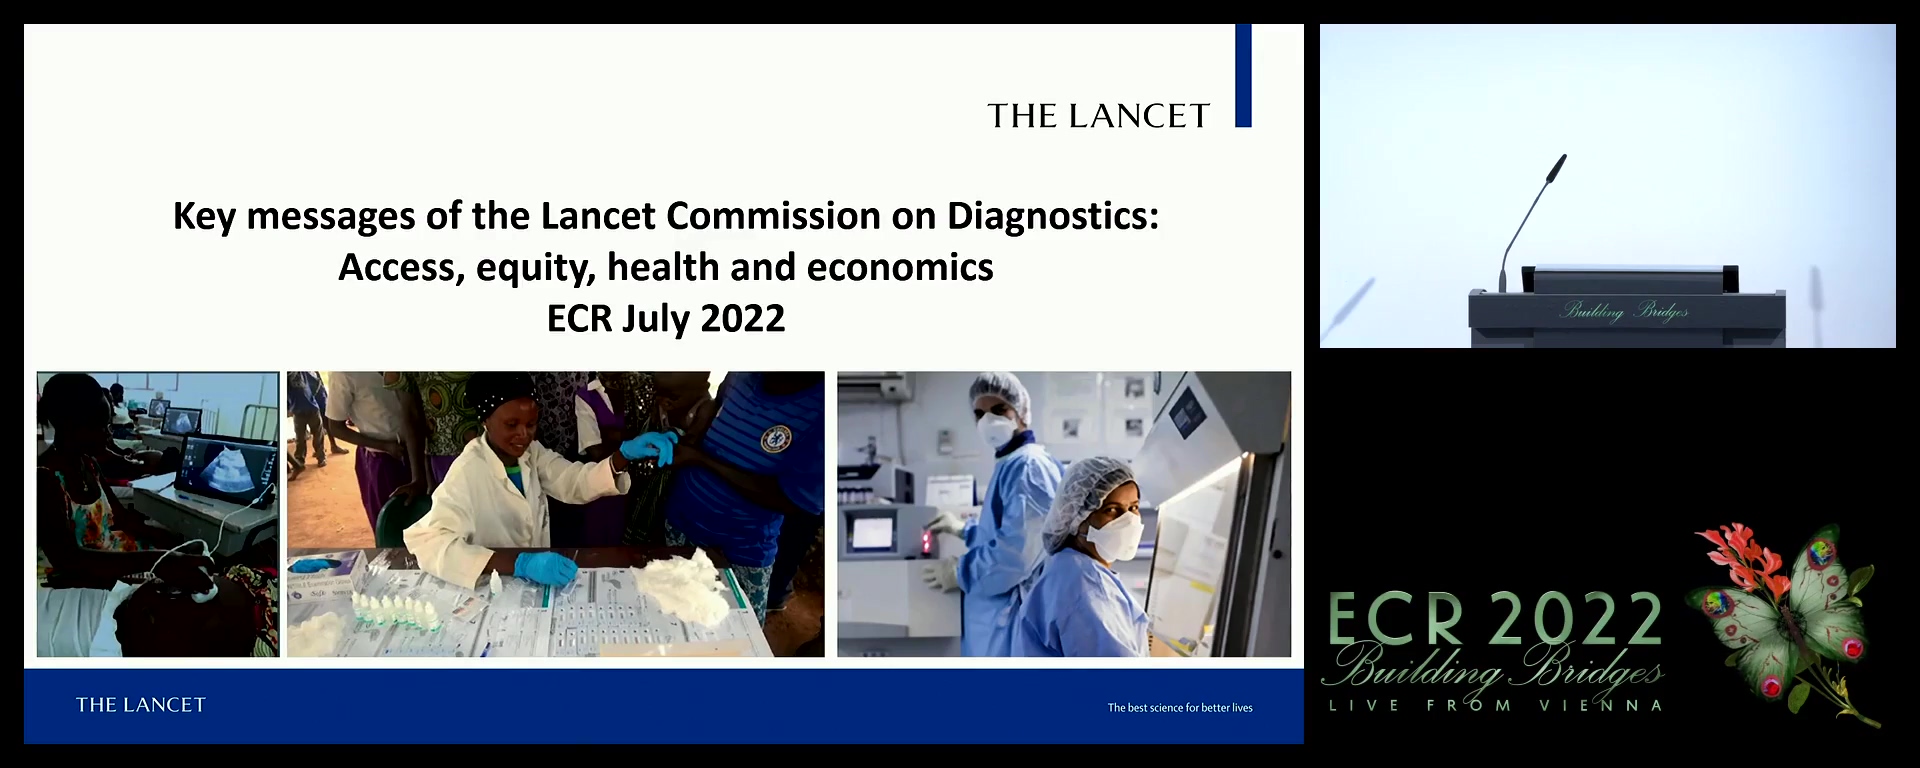 The challenges of access and the impact on health, economy, and equity across countries